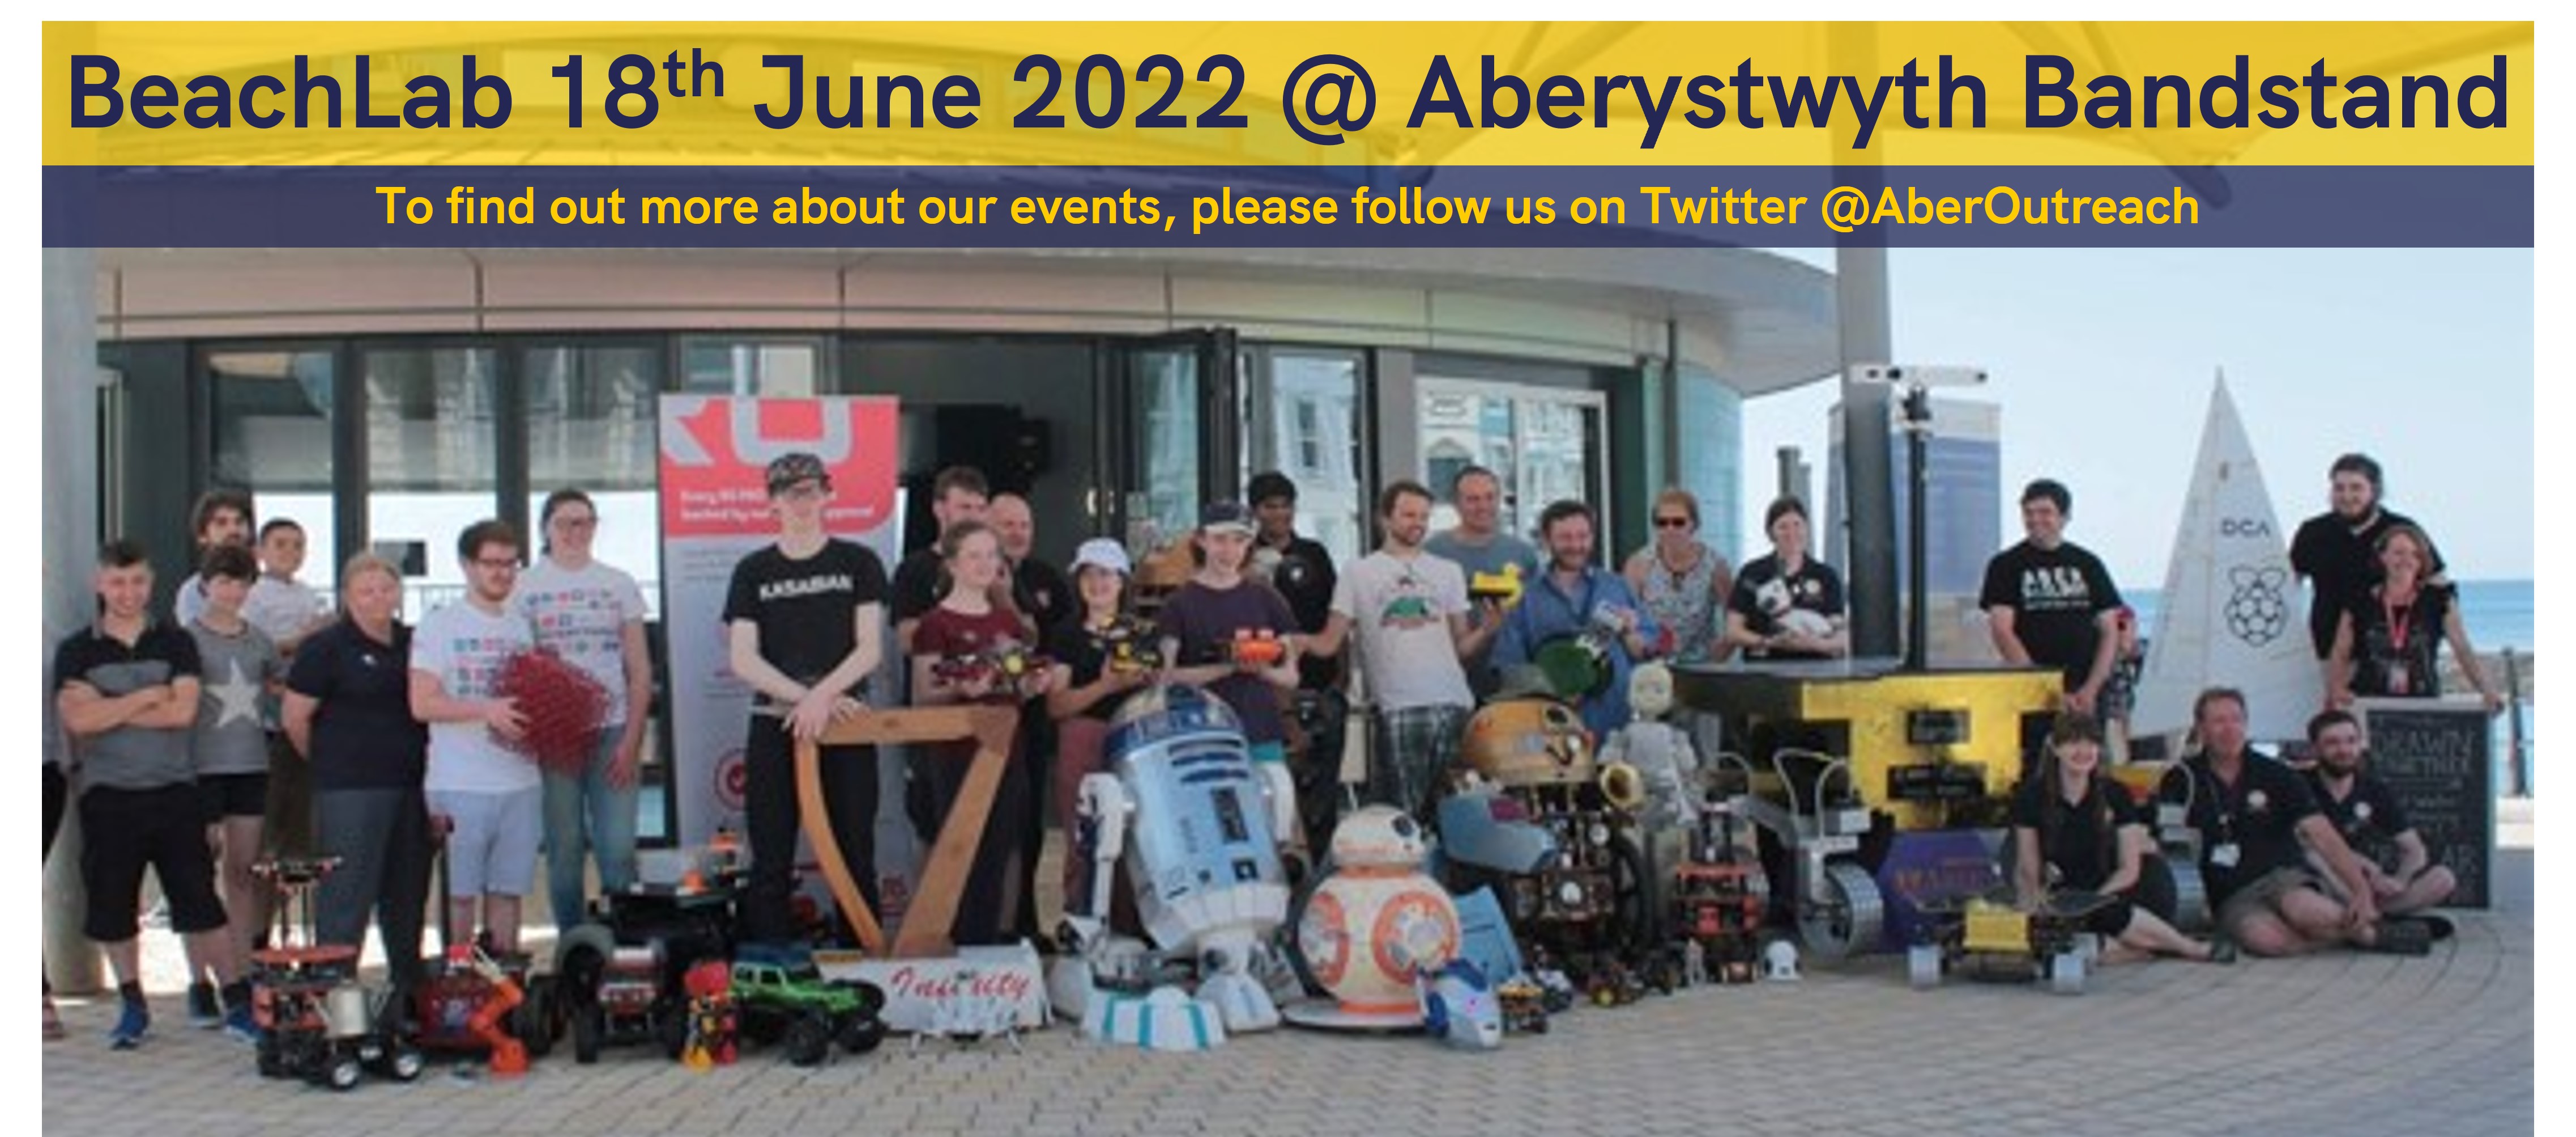 An photograph of all those involved in BeachLab 2019 outside Aberystwyth Bandstand. Banner present advertising BeachLab on 18th June 2022 at Aberystwyth Bandstand. Also includes a reminder of our Twitter account @AberOutreach to find out more about our events.